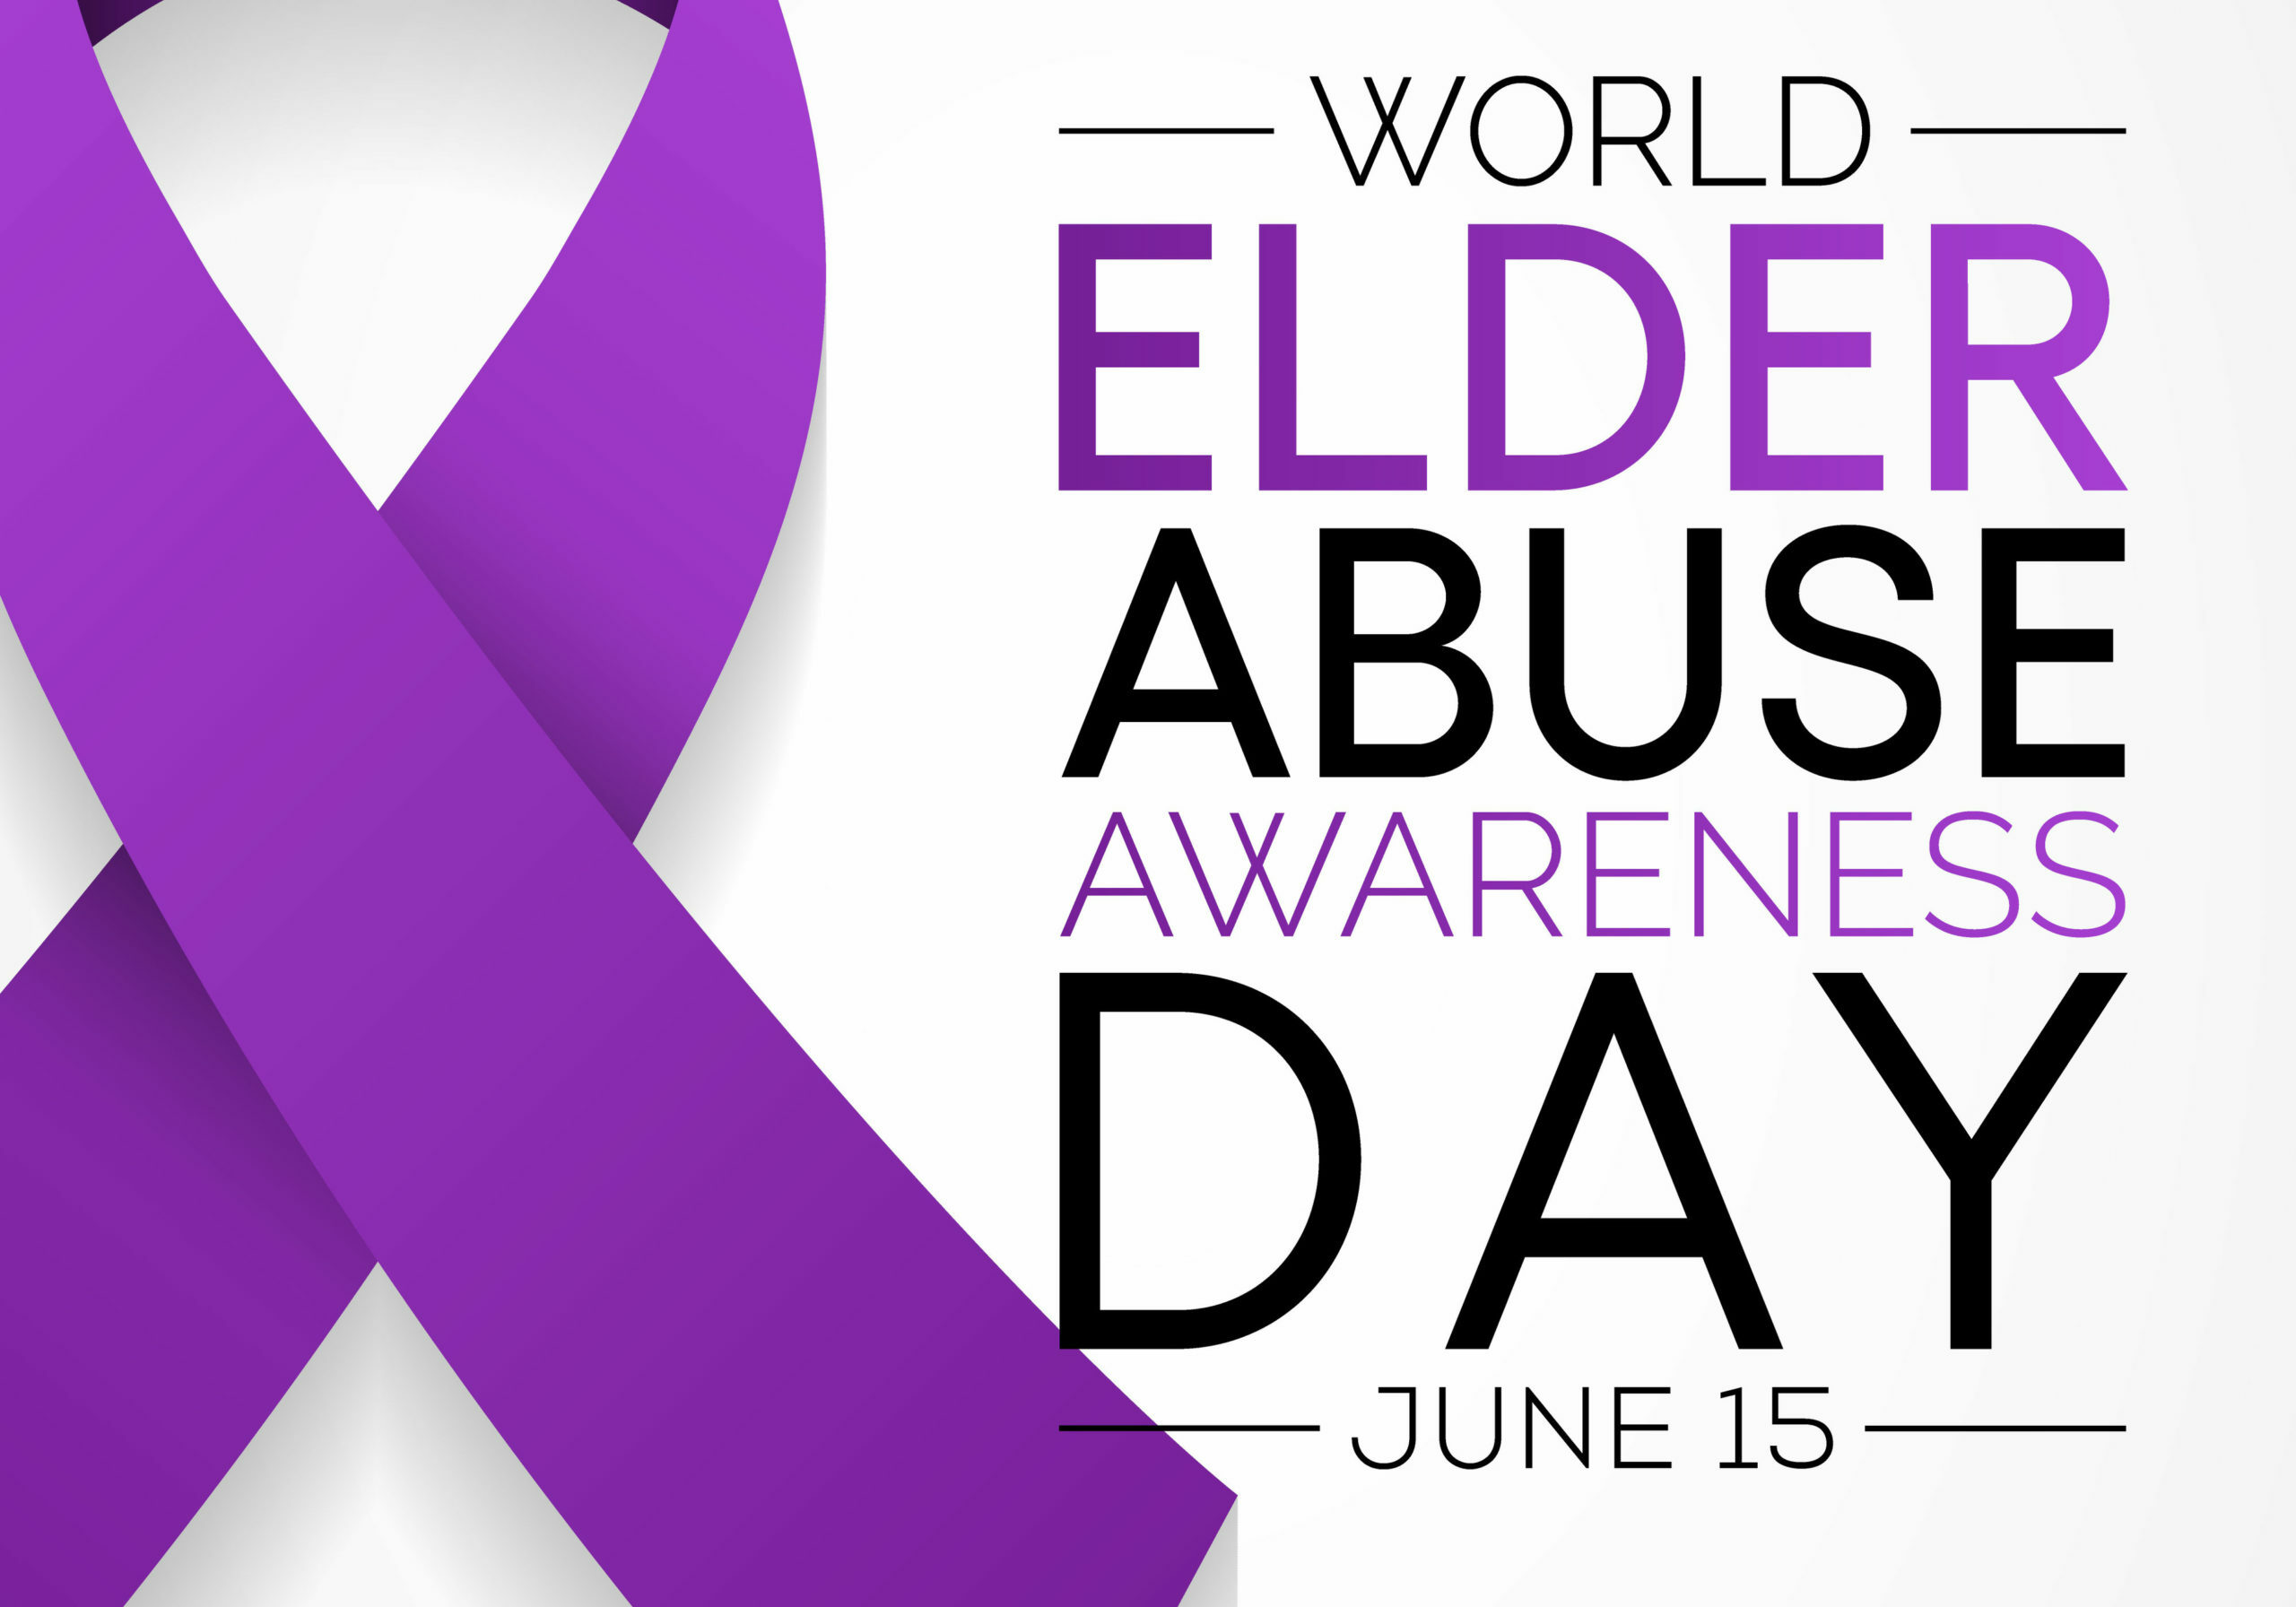 World Elder abuse awareness day is observed every year on June 15, It represents the one day in the year when the world voices its opposition to the suffering inflicted to some of our older generation